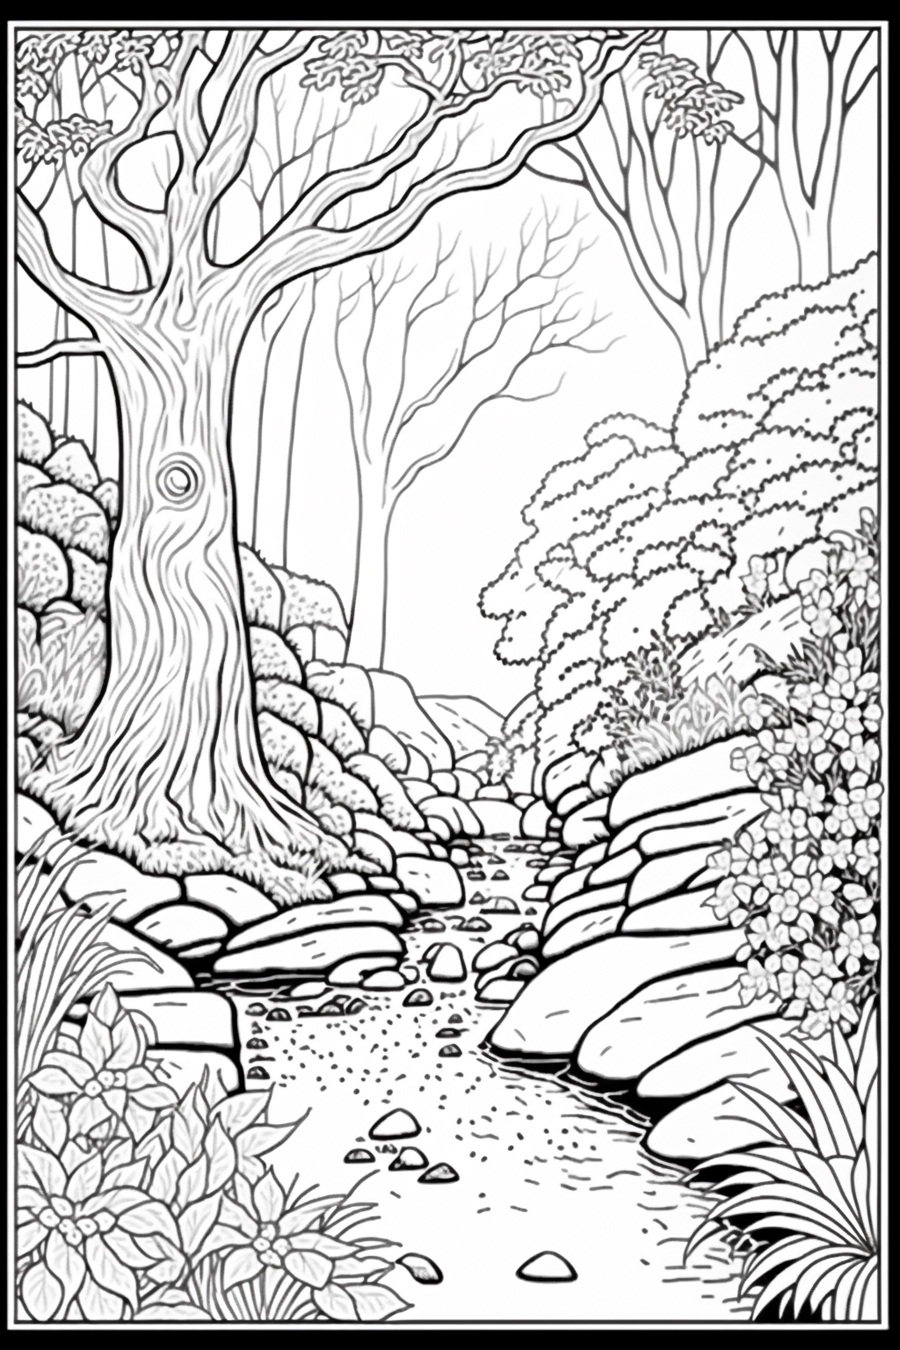 A black and white drawing of a stream in a forest.